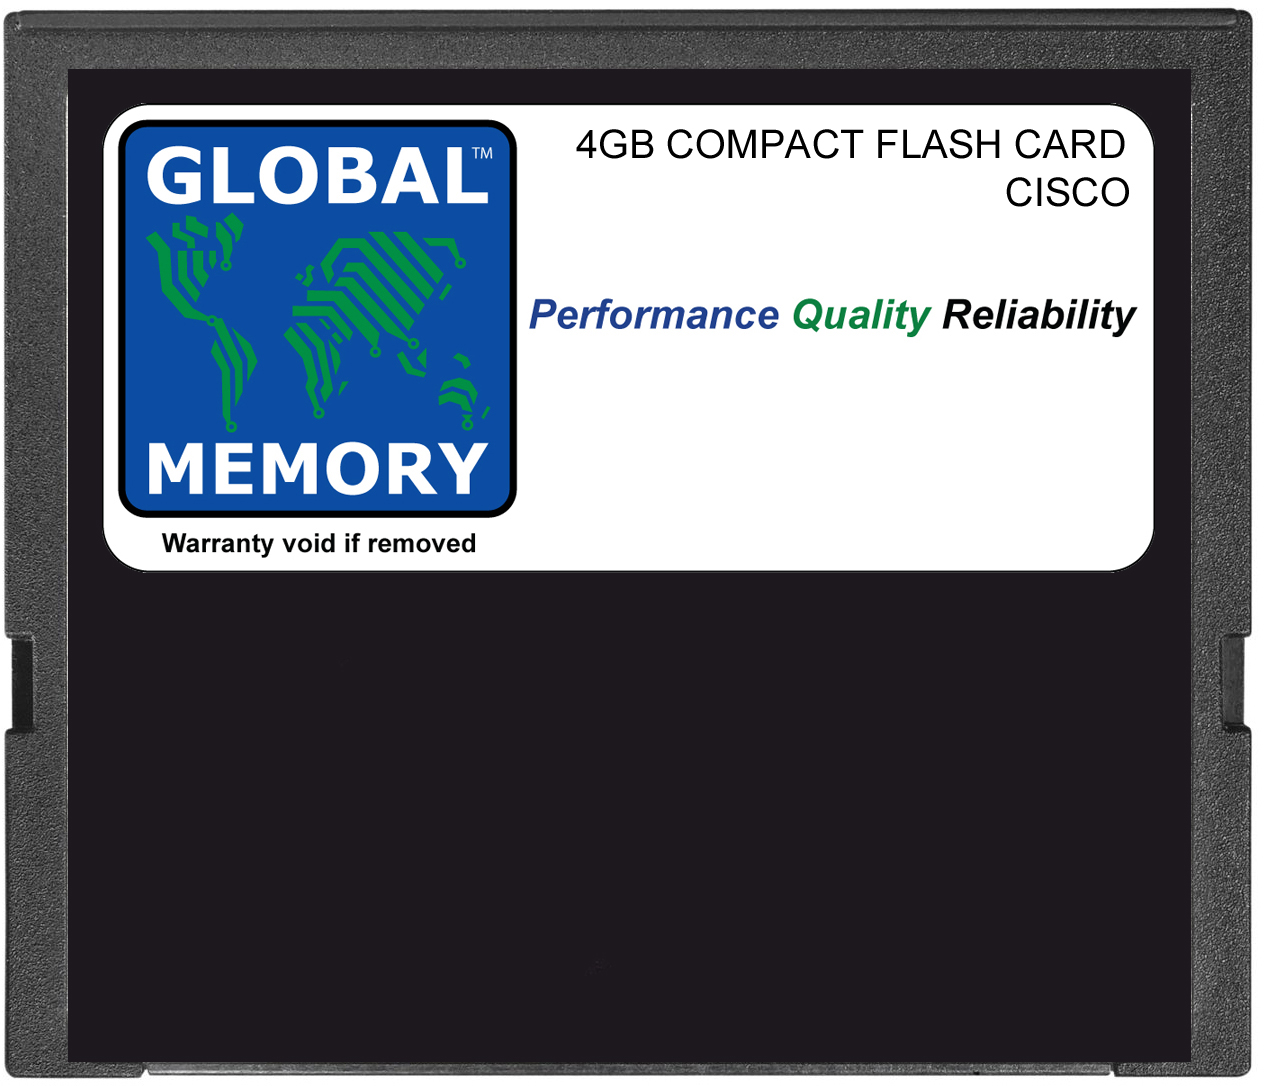 4GB COMPACT FLASH CARD MEMORY FOR CISCO XR12000 SERIES ROUTERS PRP-3 ROUTE PROCESSORS (FLASH-PRP3-4G)